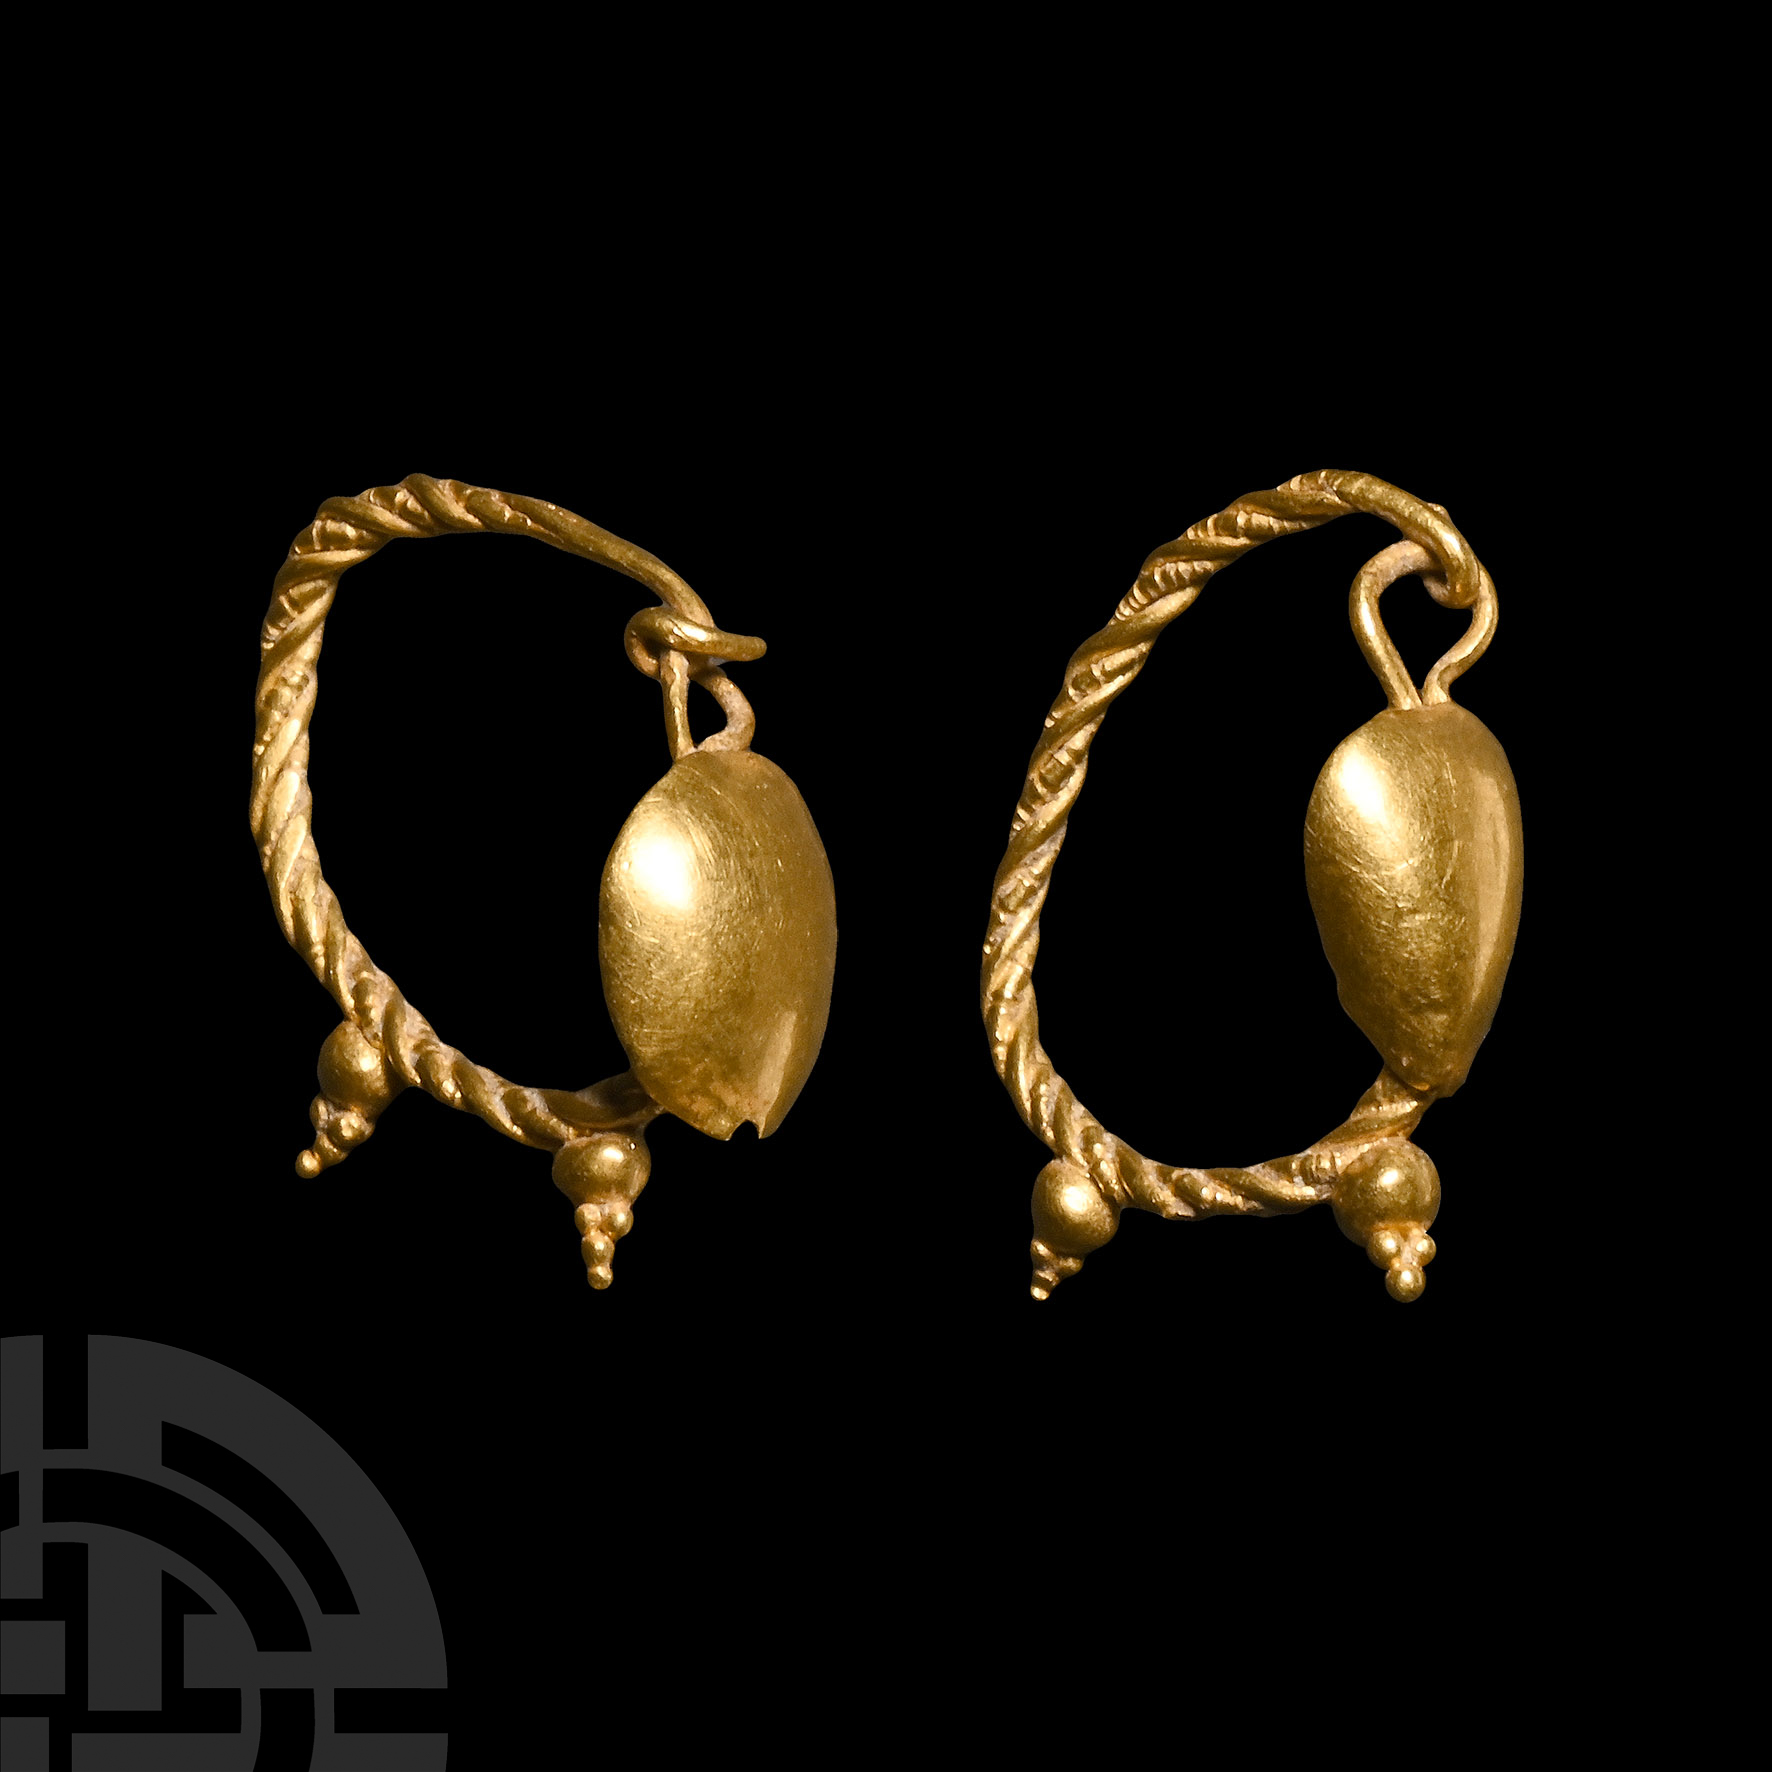 Roman Gold Earrings with Bosses